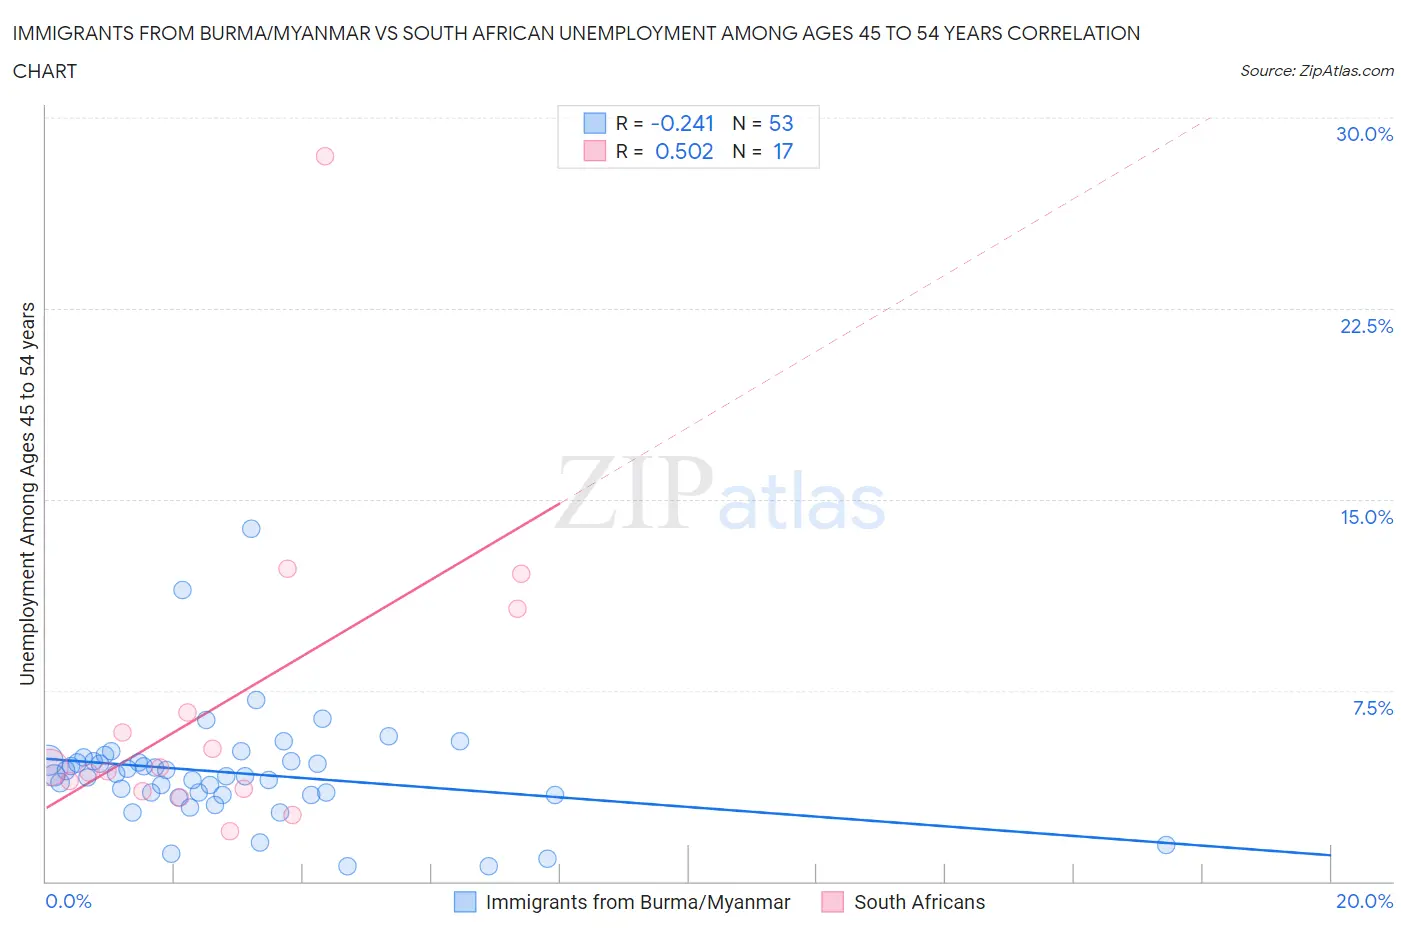 Immigrants from Burma/Myanmar vs South African Unemployment Among Ages 45 to 54 years